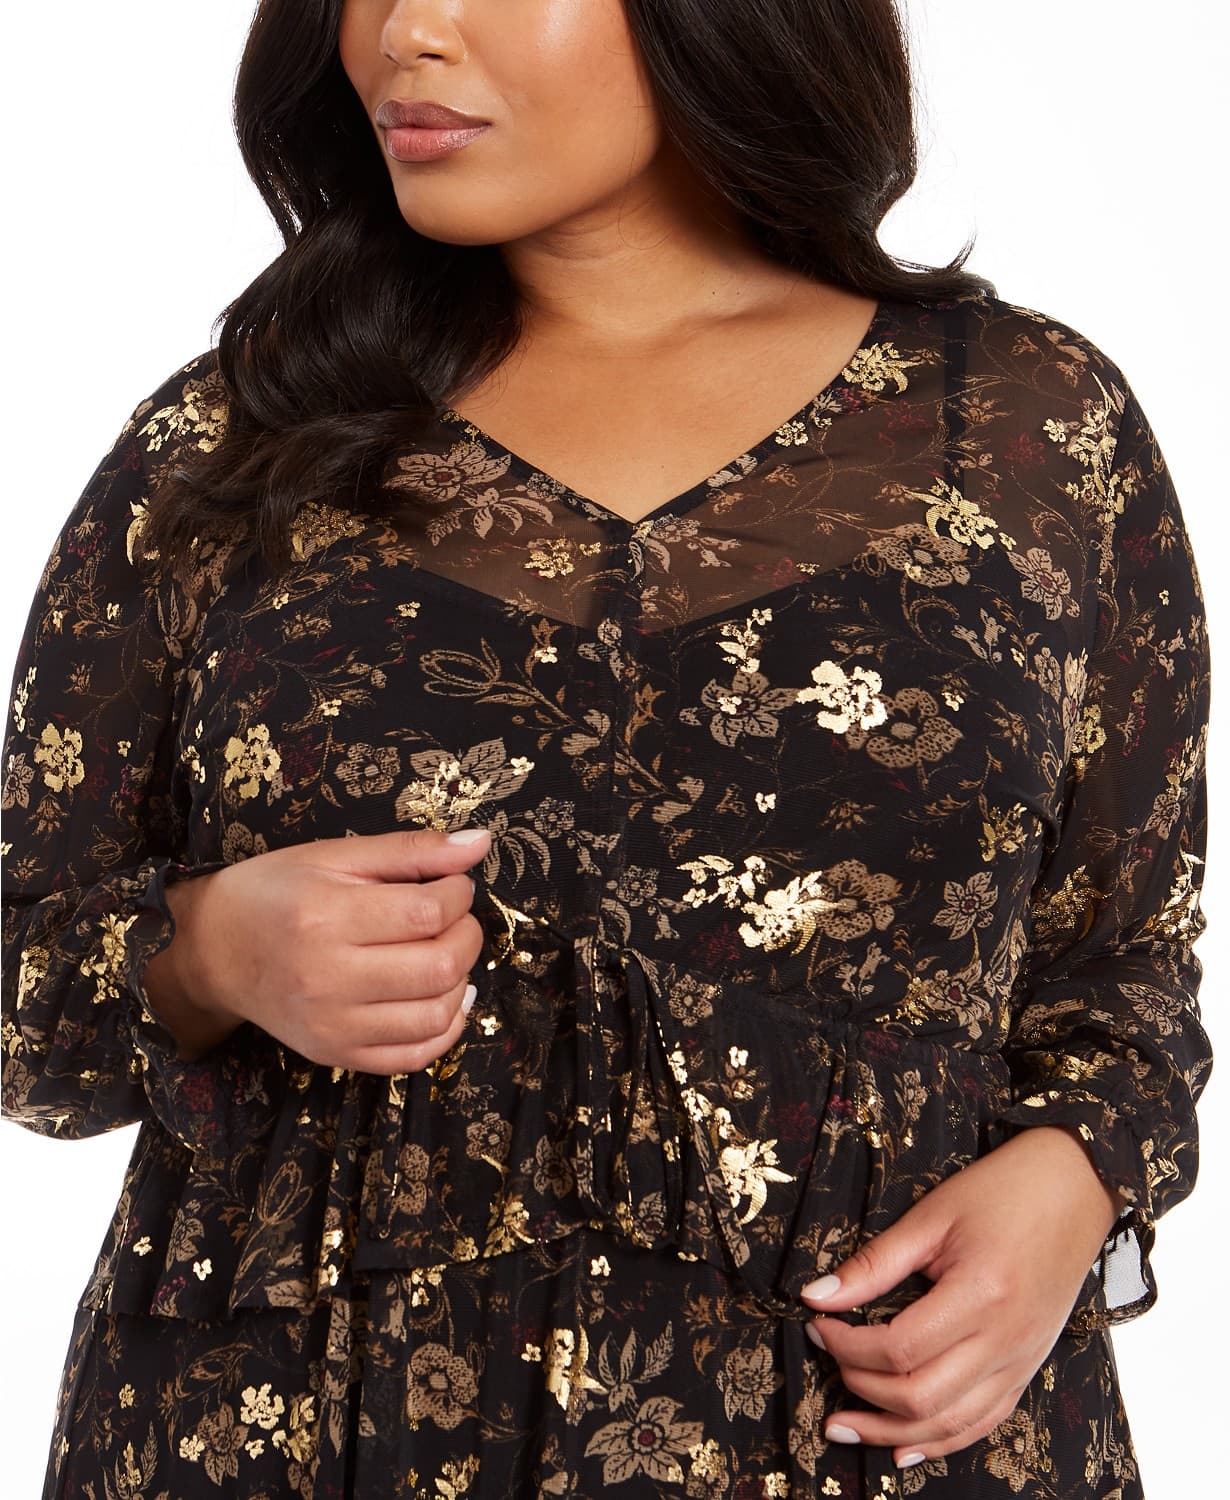 woocommerce-673321-2209615.cloudwaysapps.com-style-amp-co-womens-plus-size-black-floral-print-ruffled-top